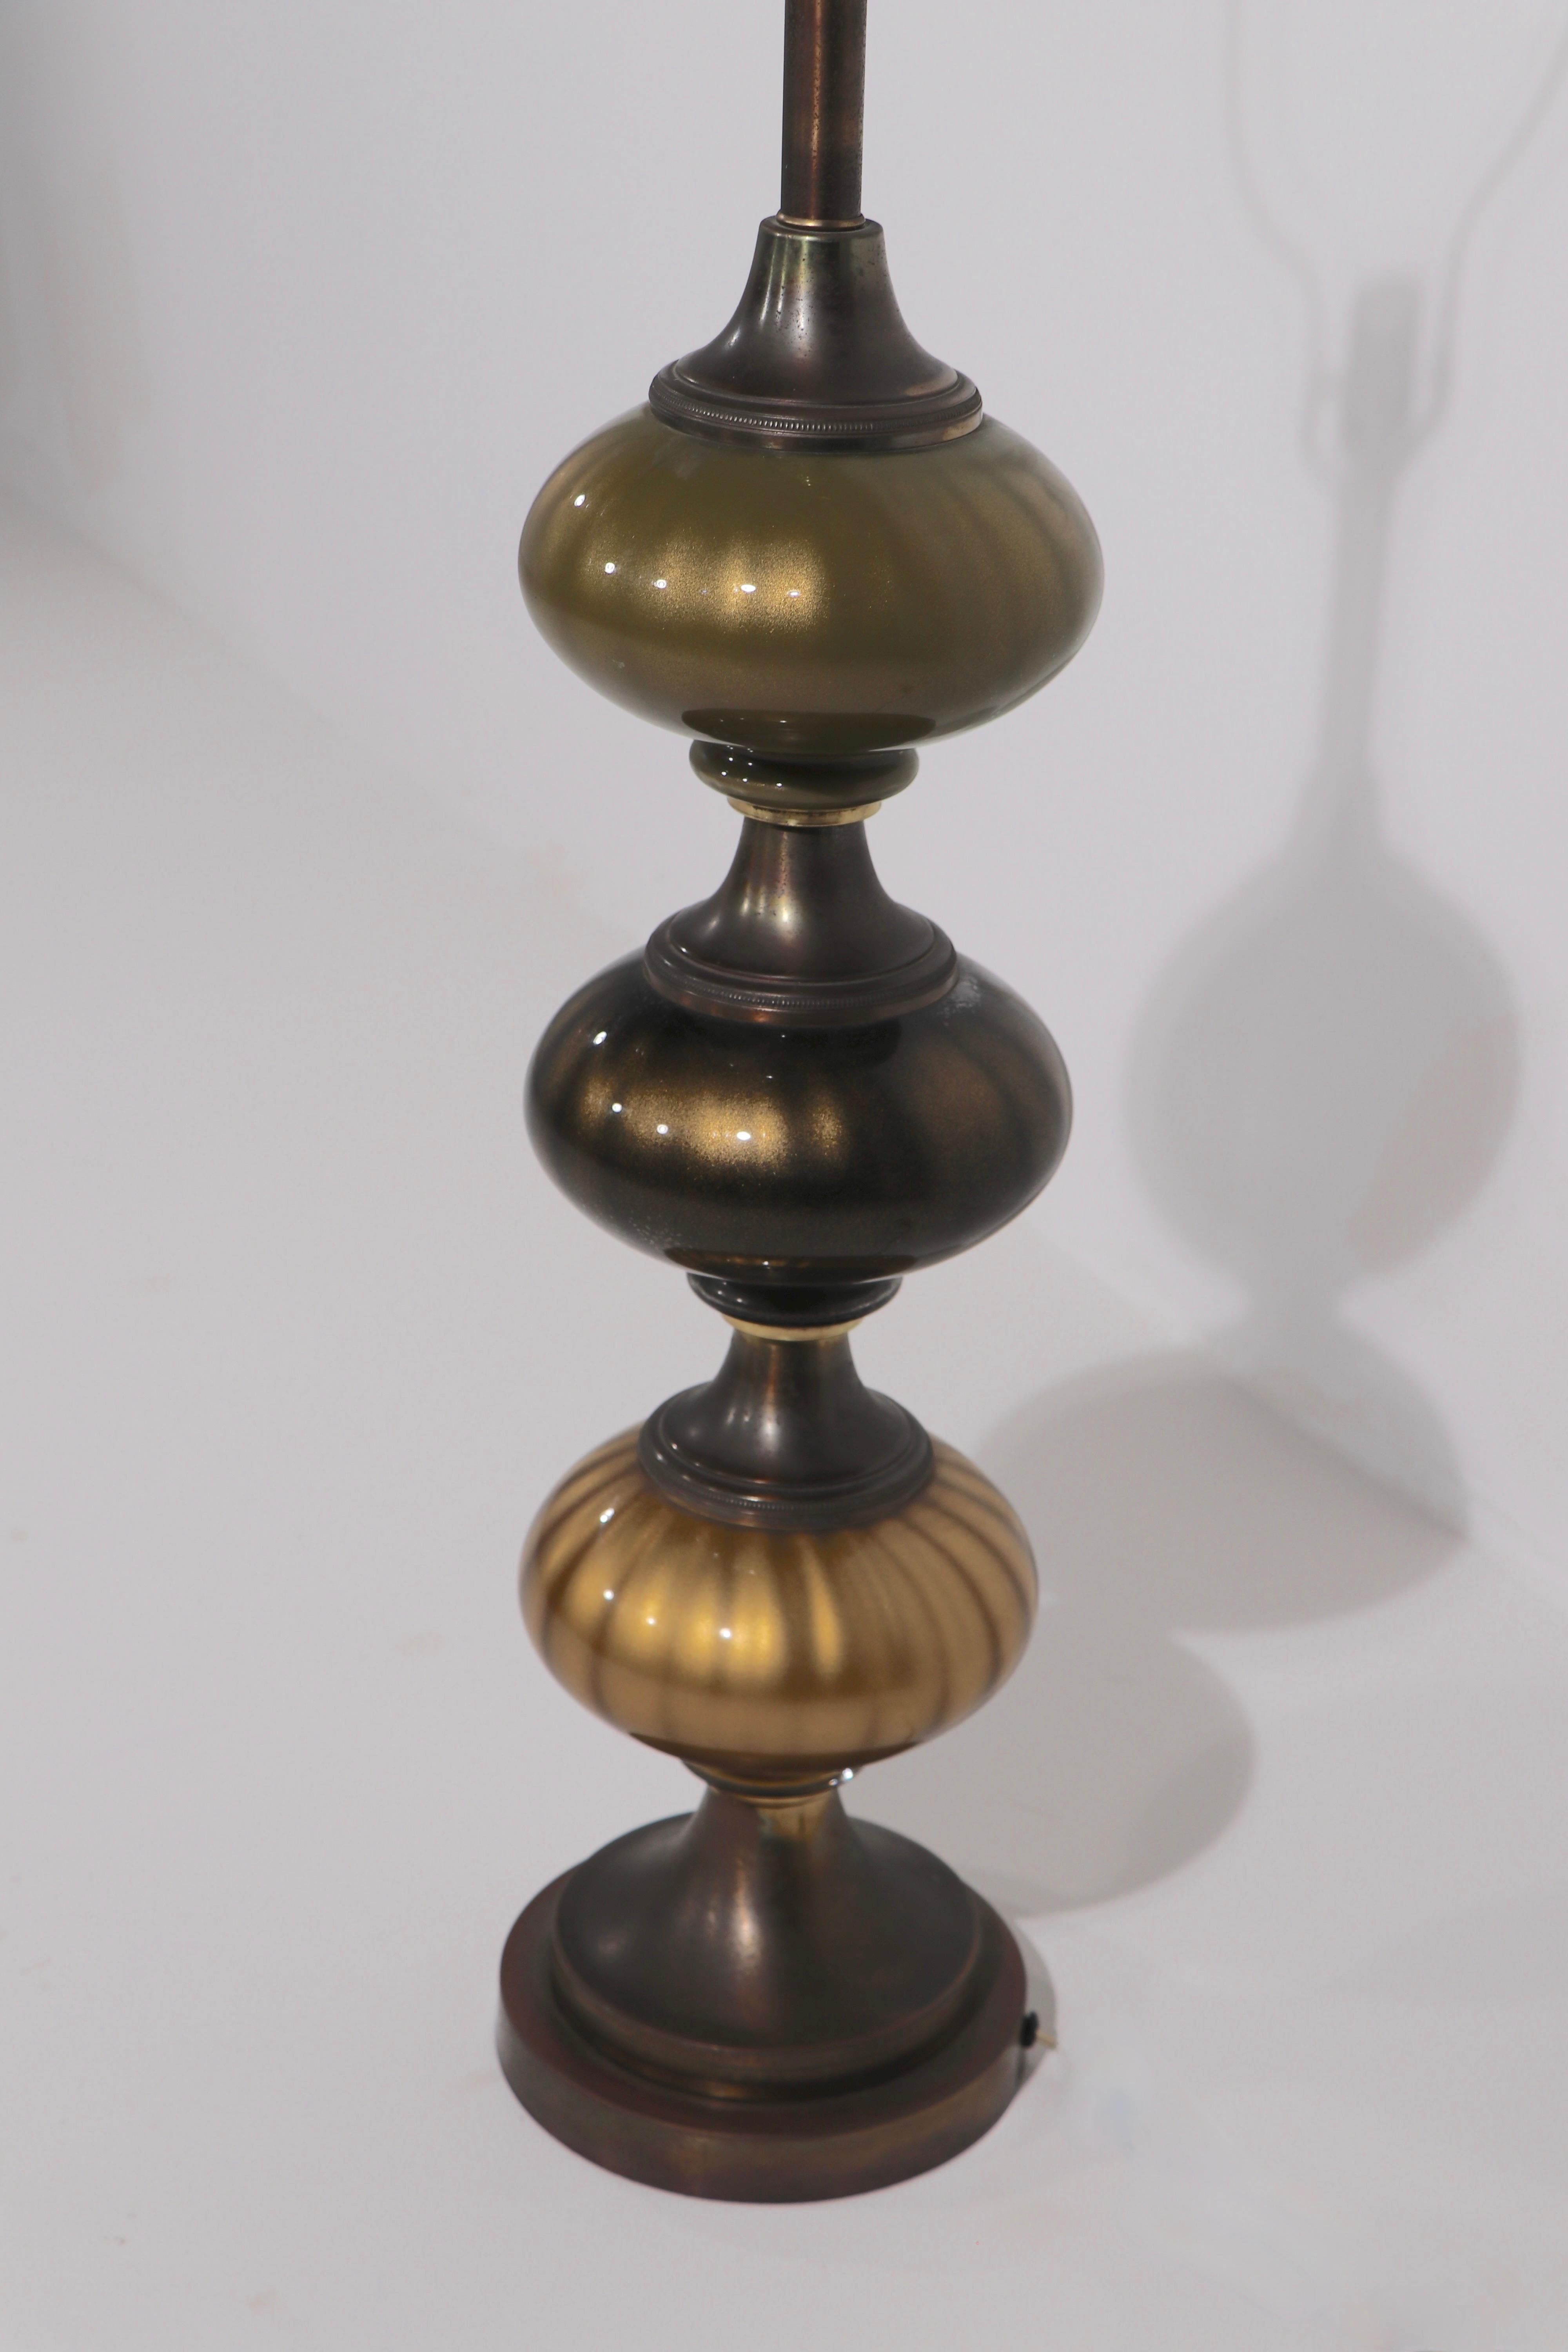 Impressive pair of mid century table lamps, having stacked art glass orbs, in three tones, brown, green, and gold , all with gold fleck inclusion. In the Italian style, probably American made, circa 1950/1960 vintage.
Both lamps are in very good,